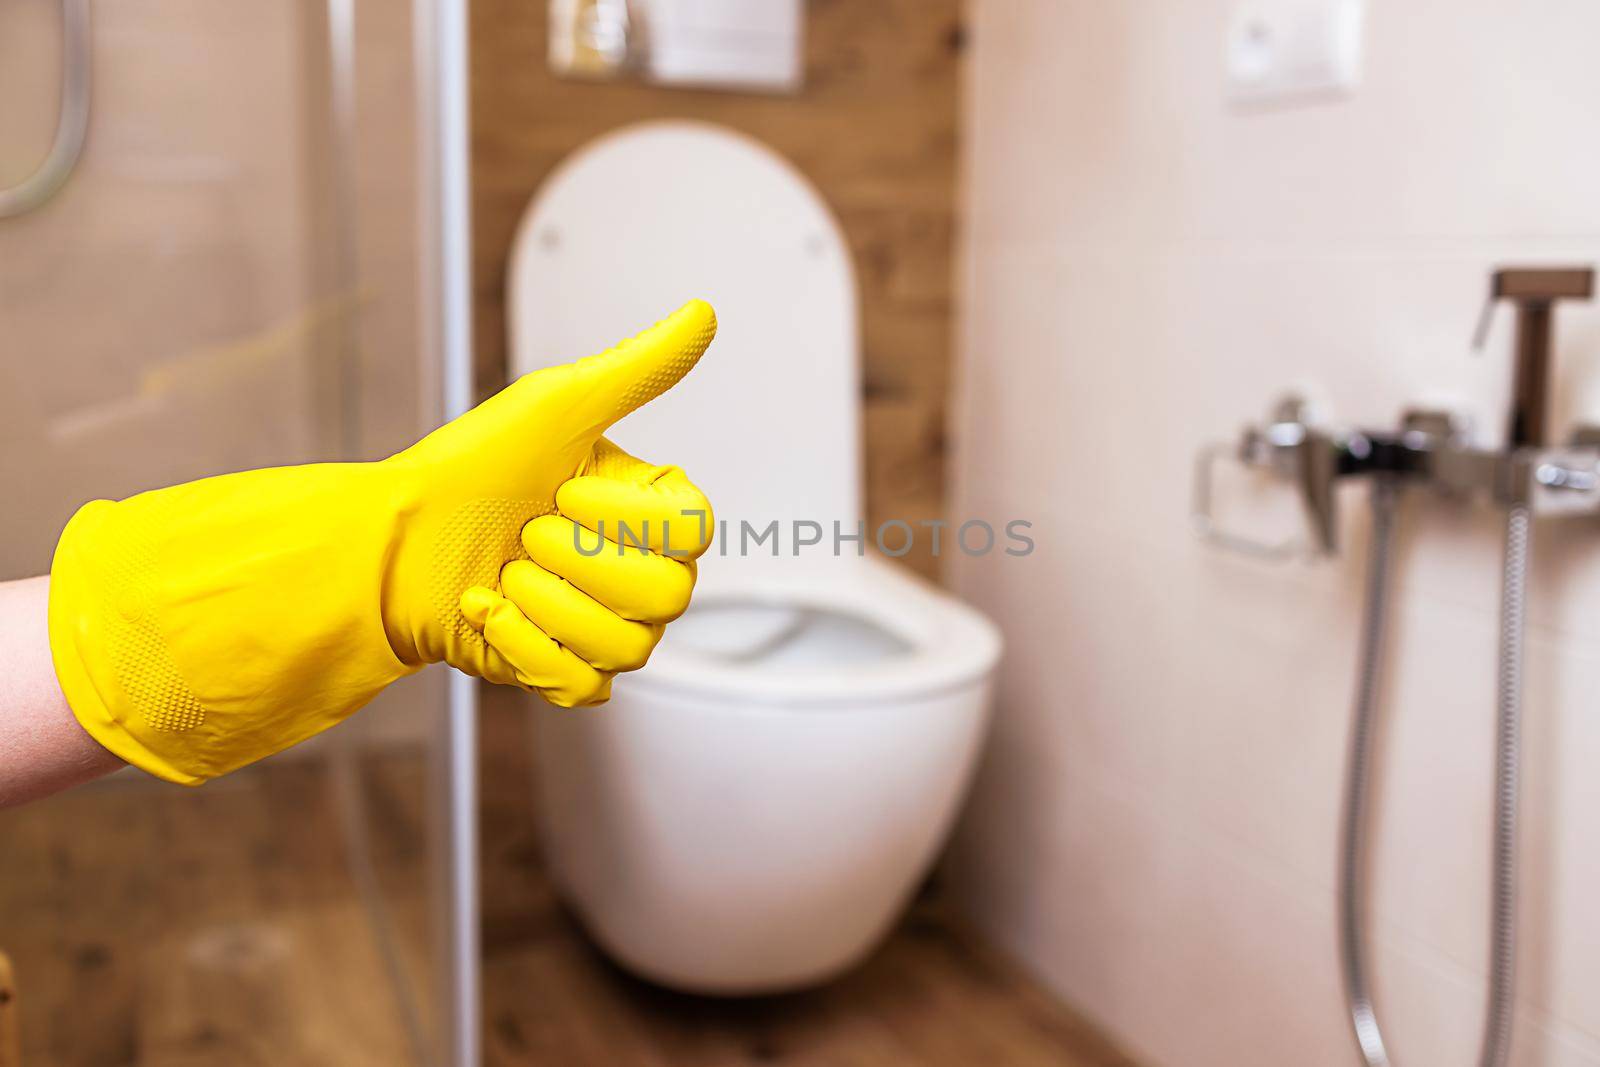 Against the background of a toilet bowl and a bathroom in a modern style, close-up of a hand in a yellow protective glove shows the sign excellent. The concept of good cleaning, indoor hygiene.